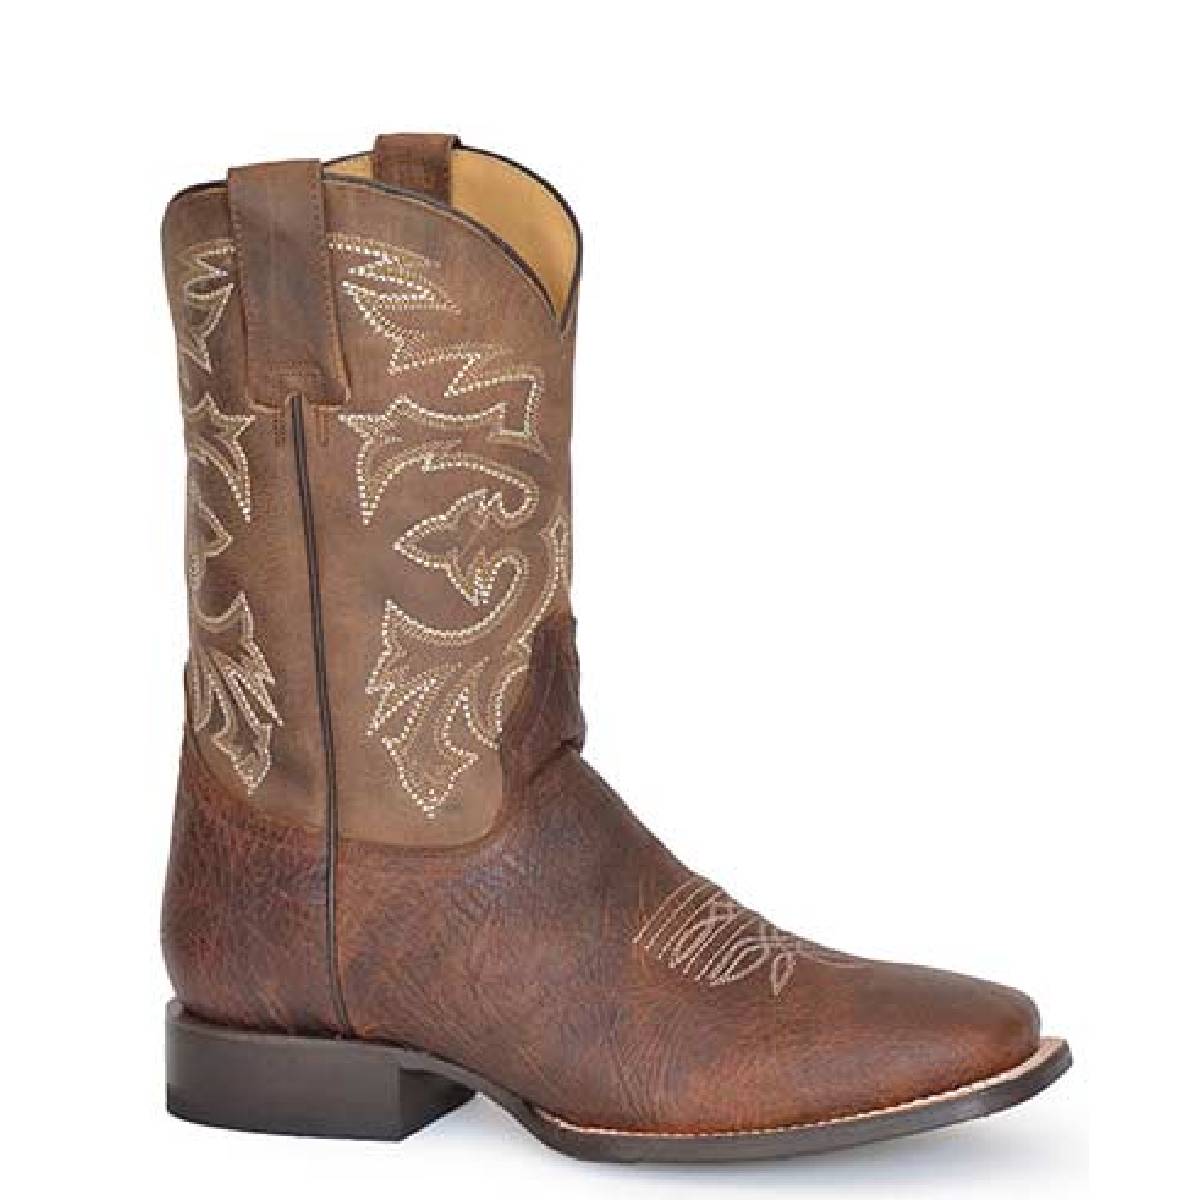 Men's Stetson Buff Leather Boots Handcrafted Brown - yeehawcowboy